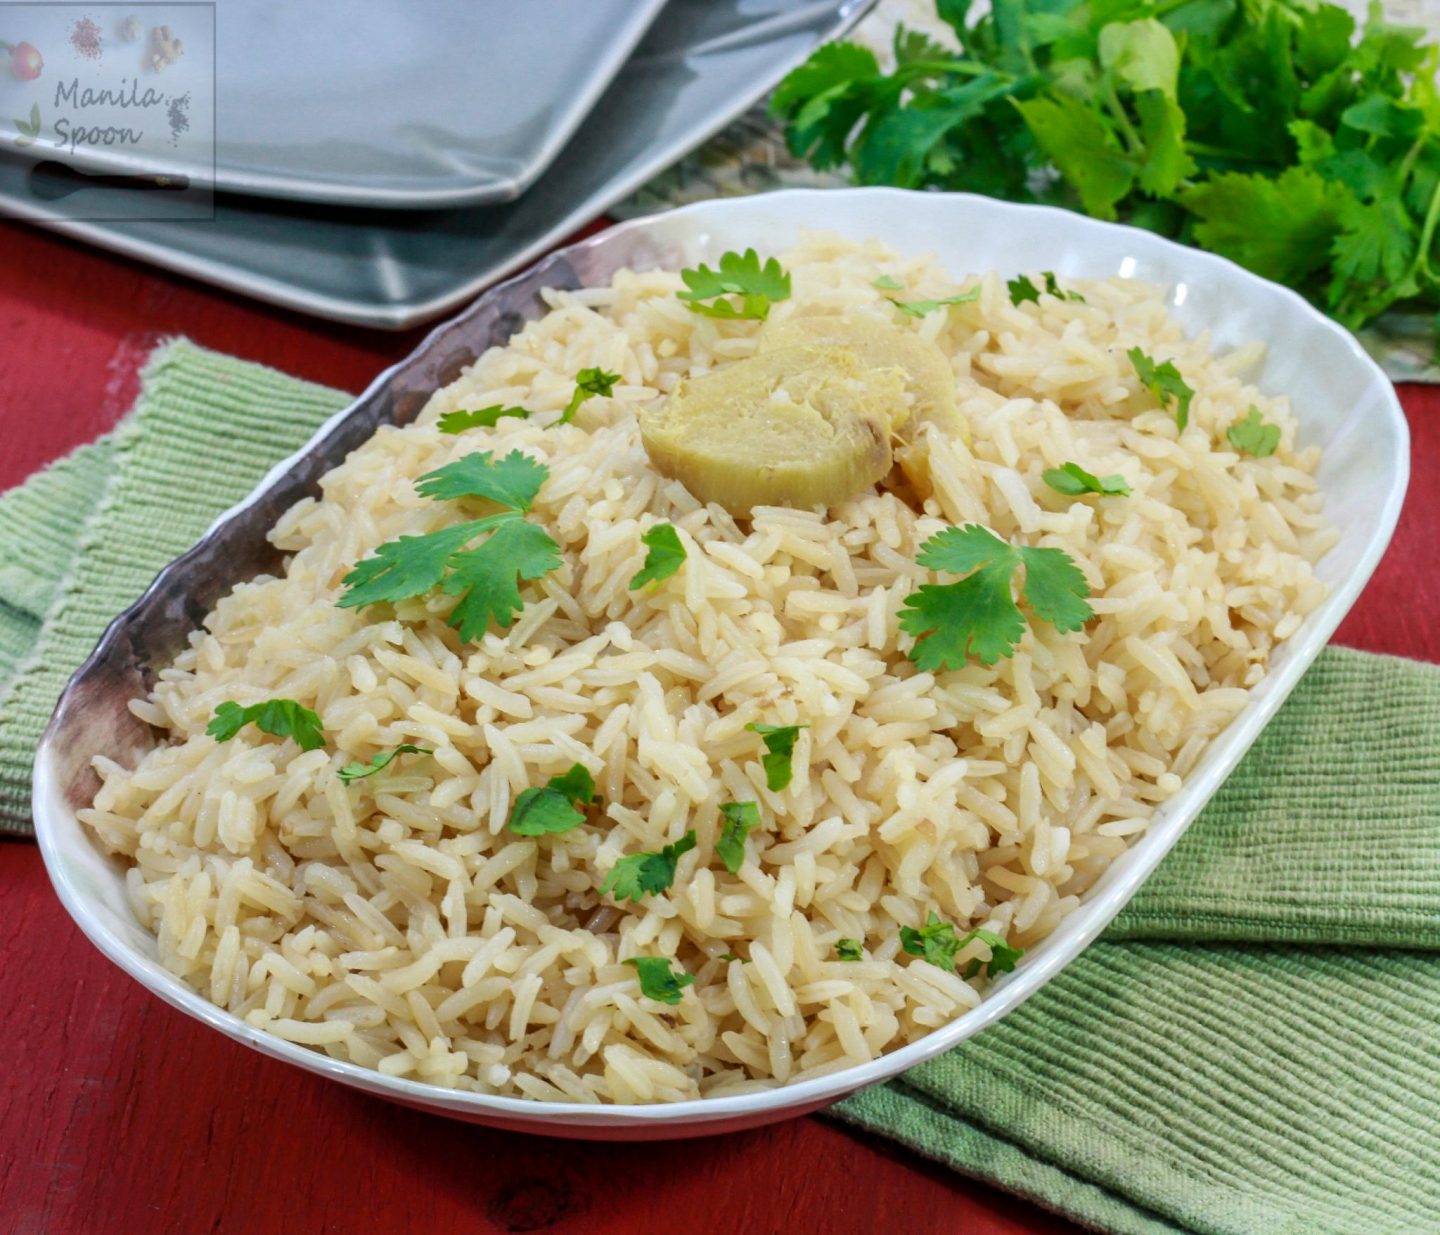  Flavored with garlic and ginger and cooked in chicken broth, this easy rice dish is not only tasty, but would complement any main dish that requires rice. It can be made on the stove or rice cooker for ease and convenience. #rice #garlicrice #gingerrice #comgungtuong 